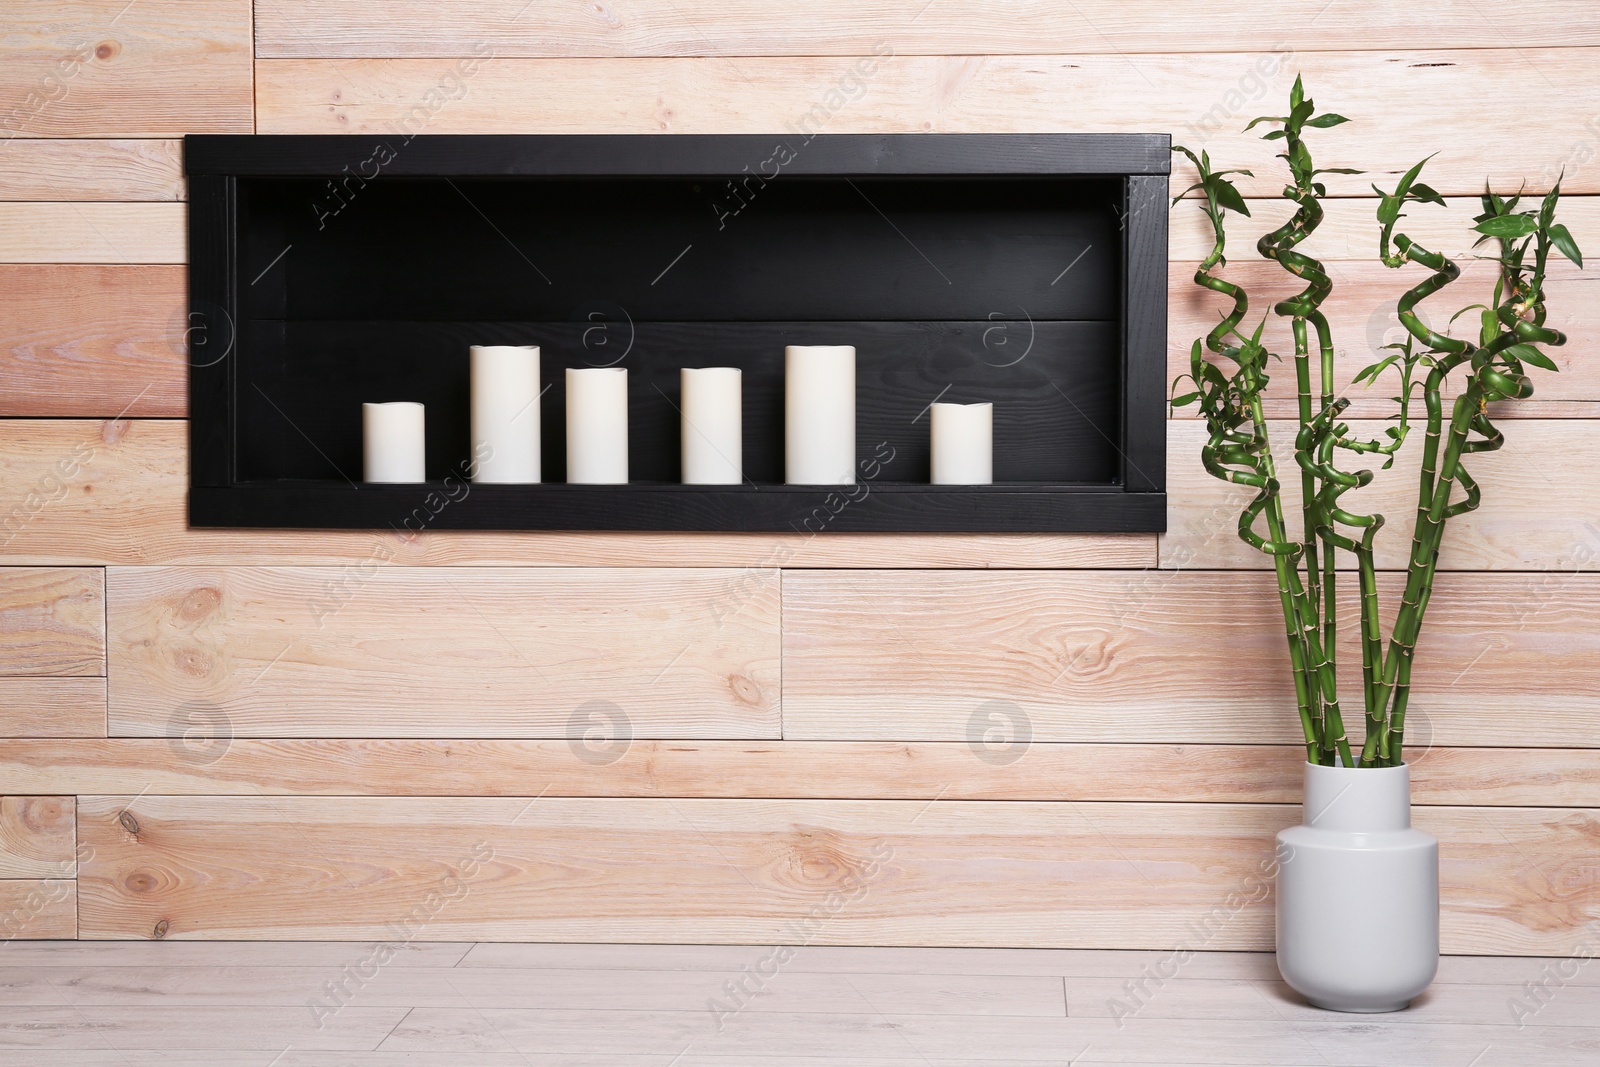 Photo of Vase with green bamboo near candles on shelf indoors